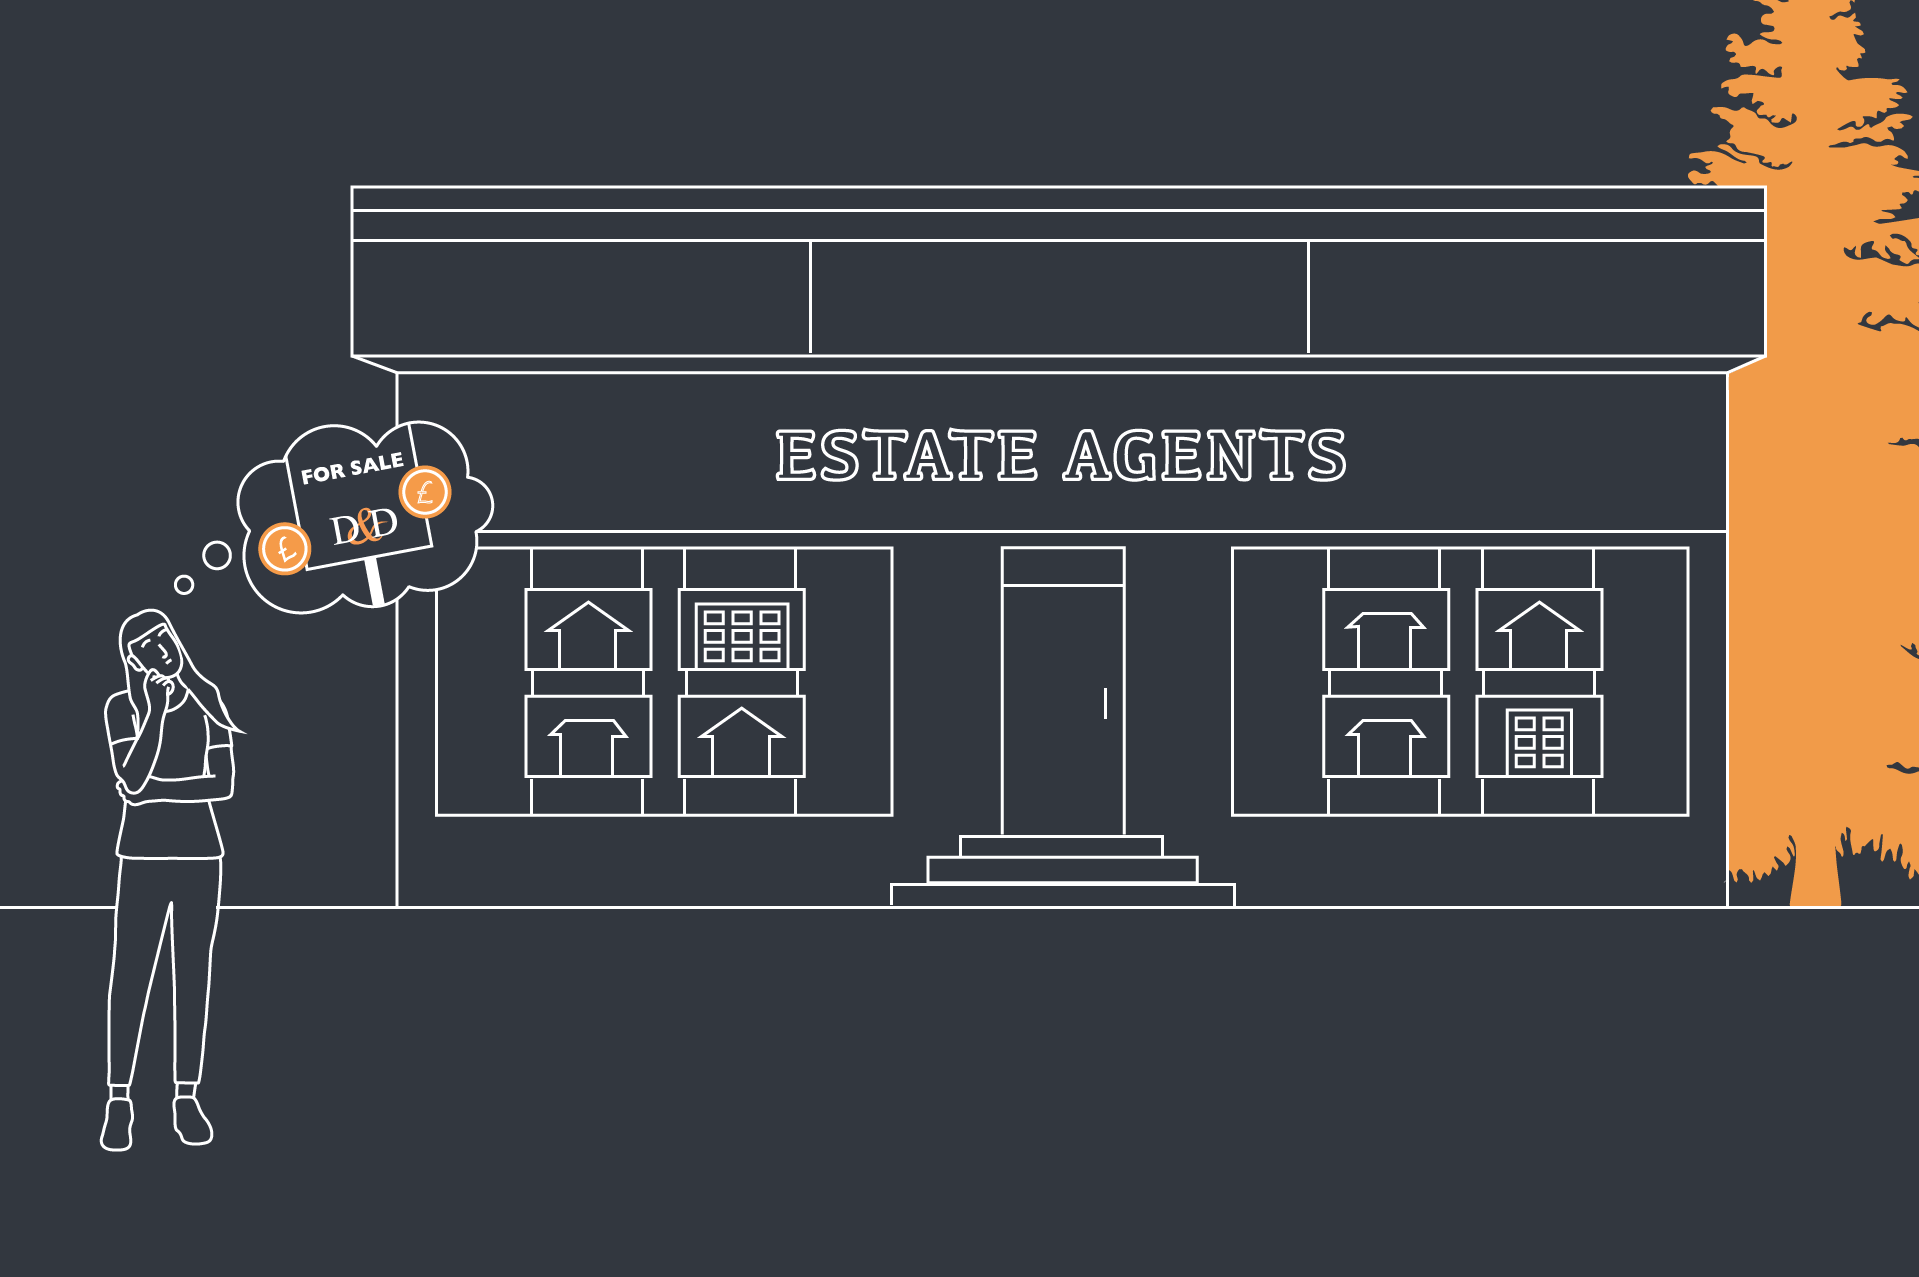 Illustration of a man stood outside a an estate agents